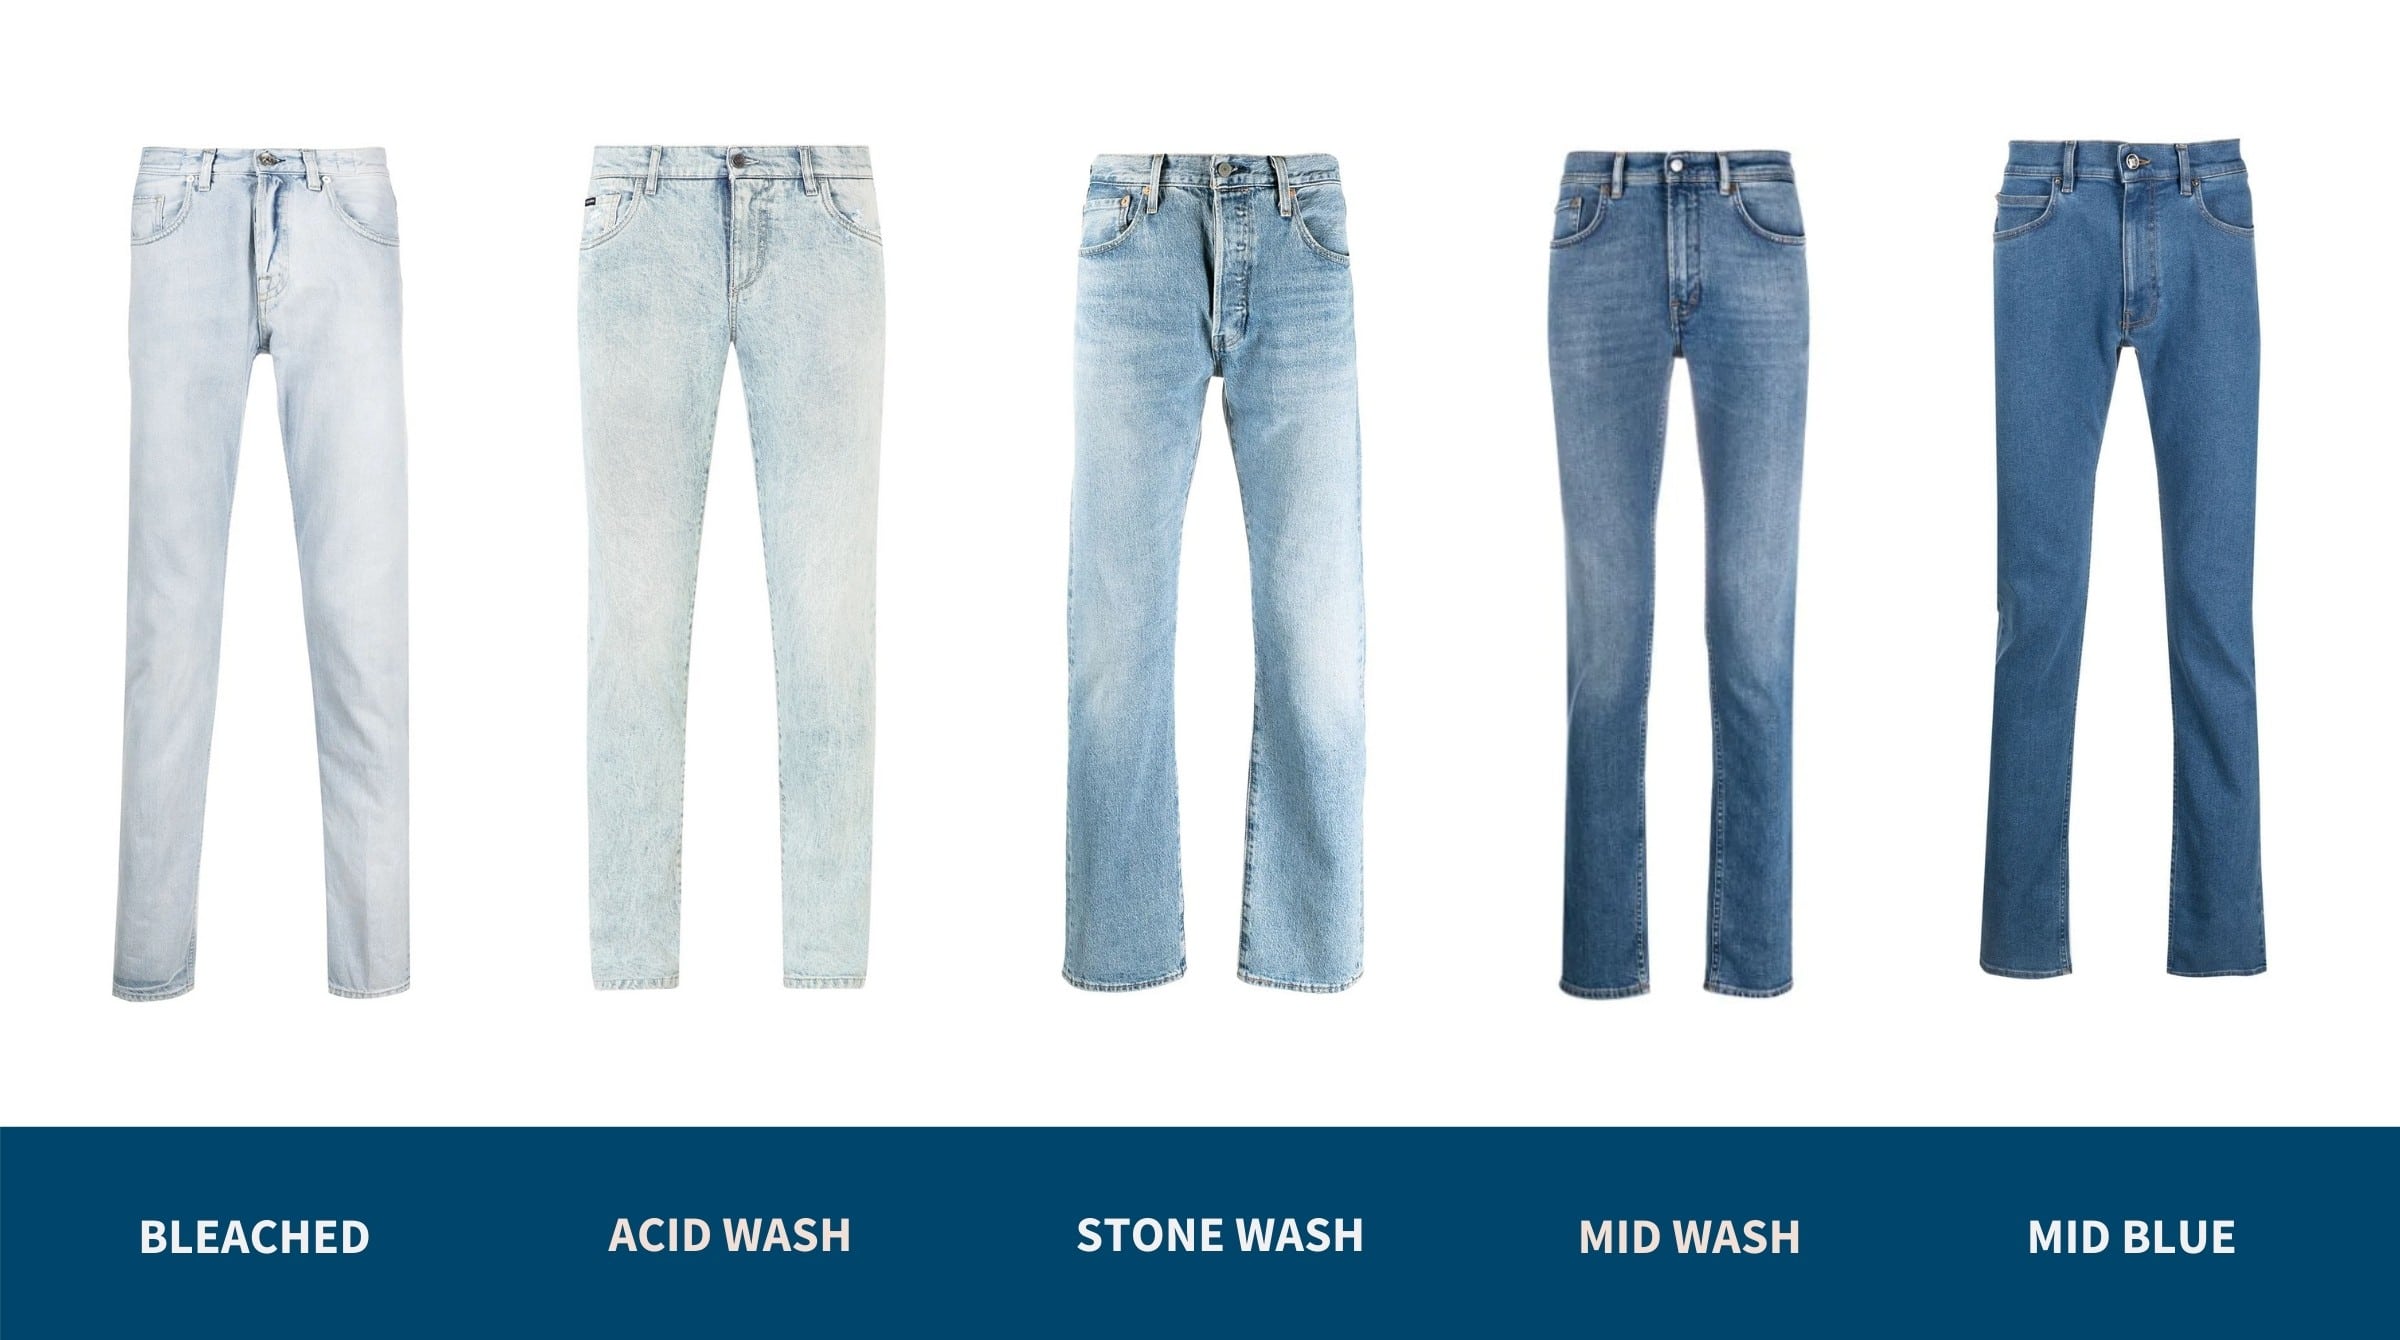 12 Men's Light Wash Jeans That to Buy in 2022